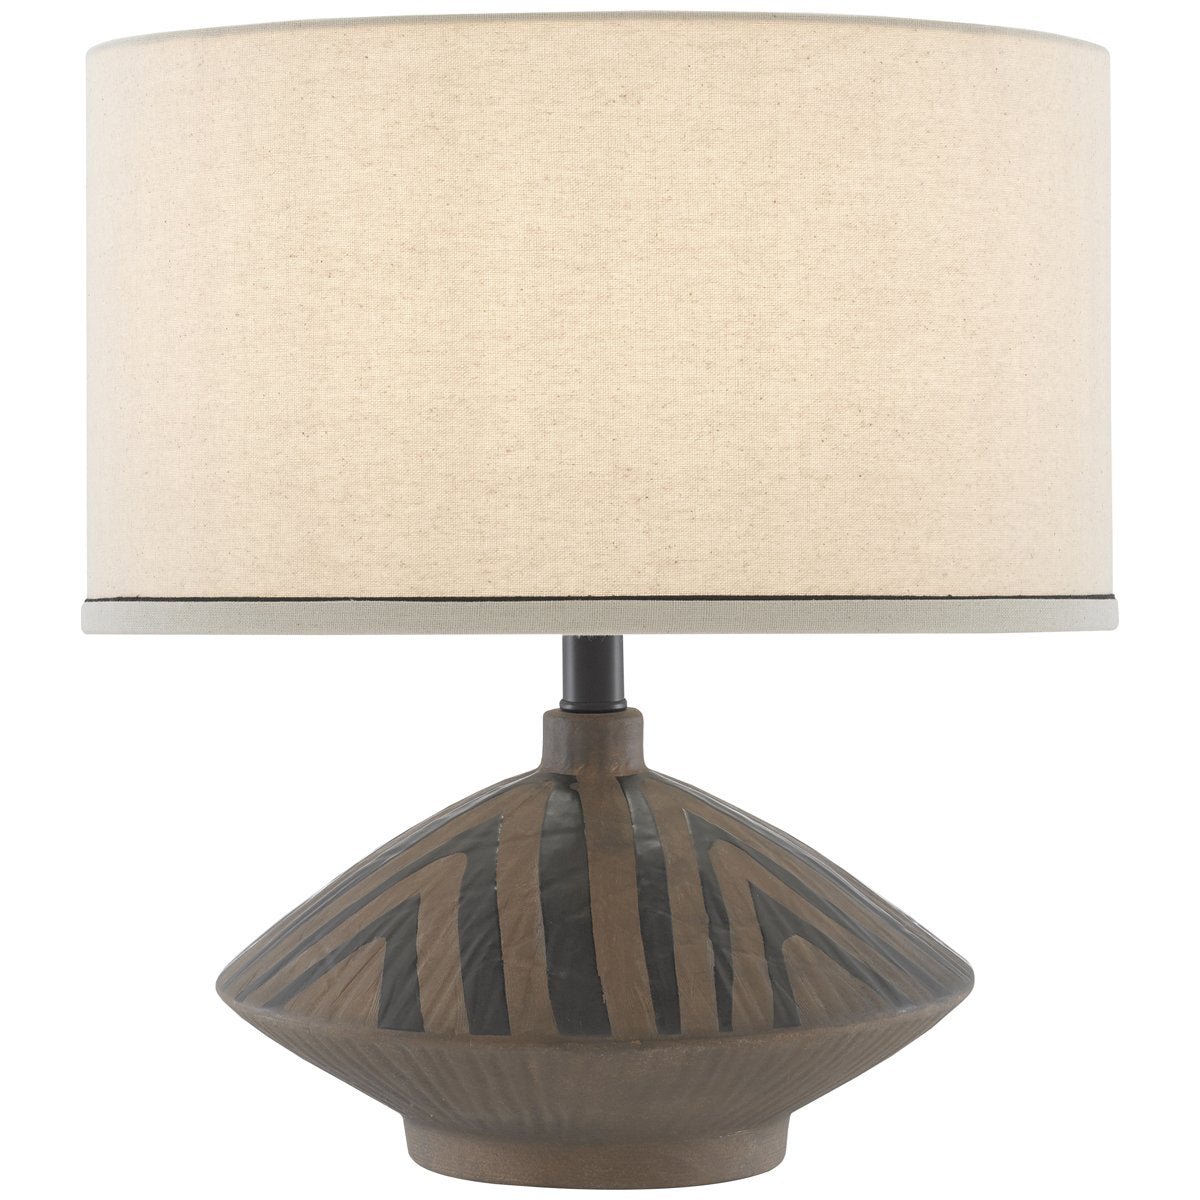 Currey and Company Juno Table Lamp